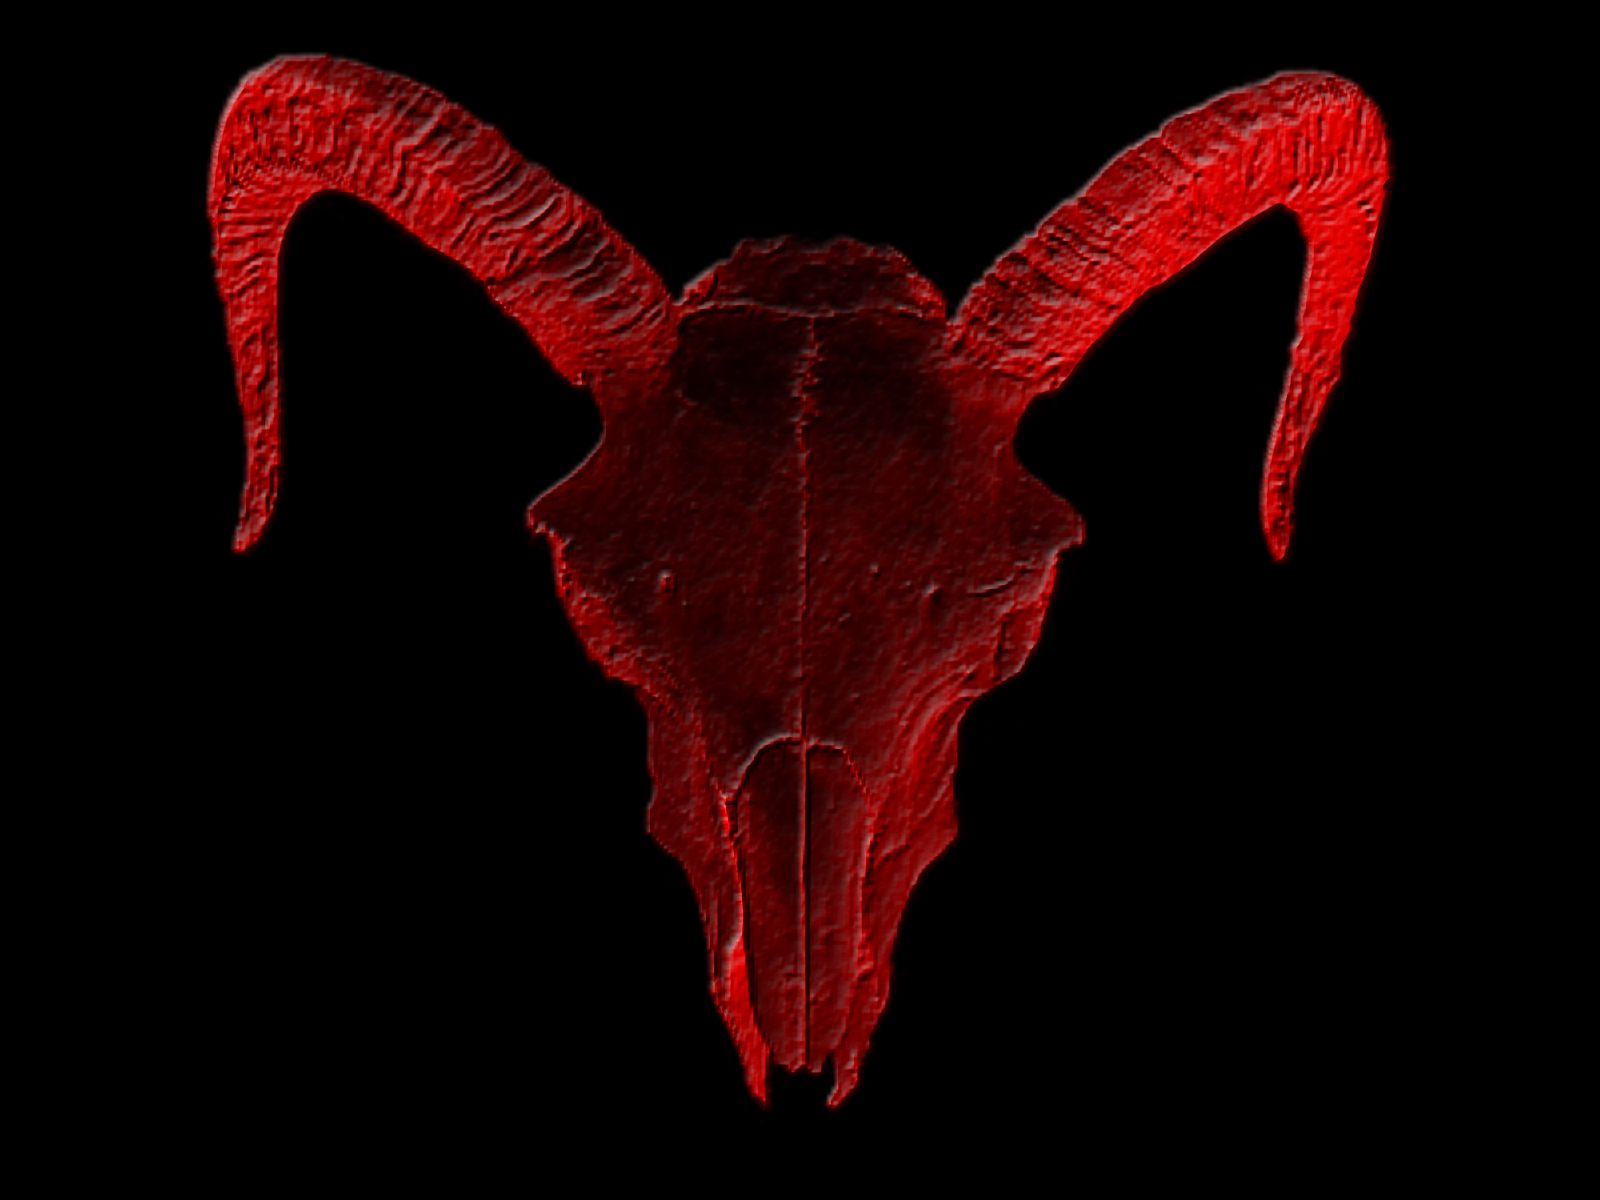 Wallpaper 14 Sheep Skull Red and Black Wallpapers 1600x1200